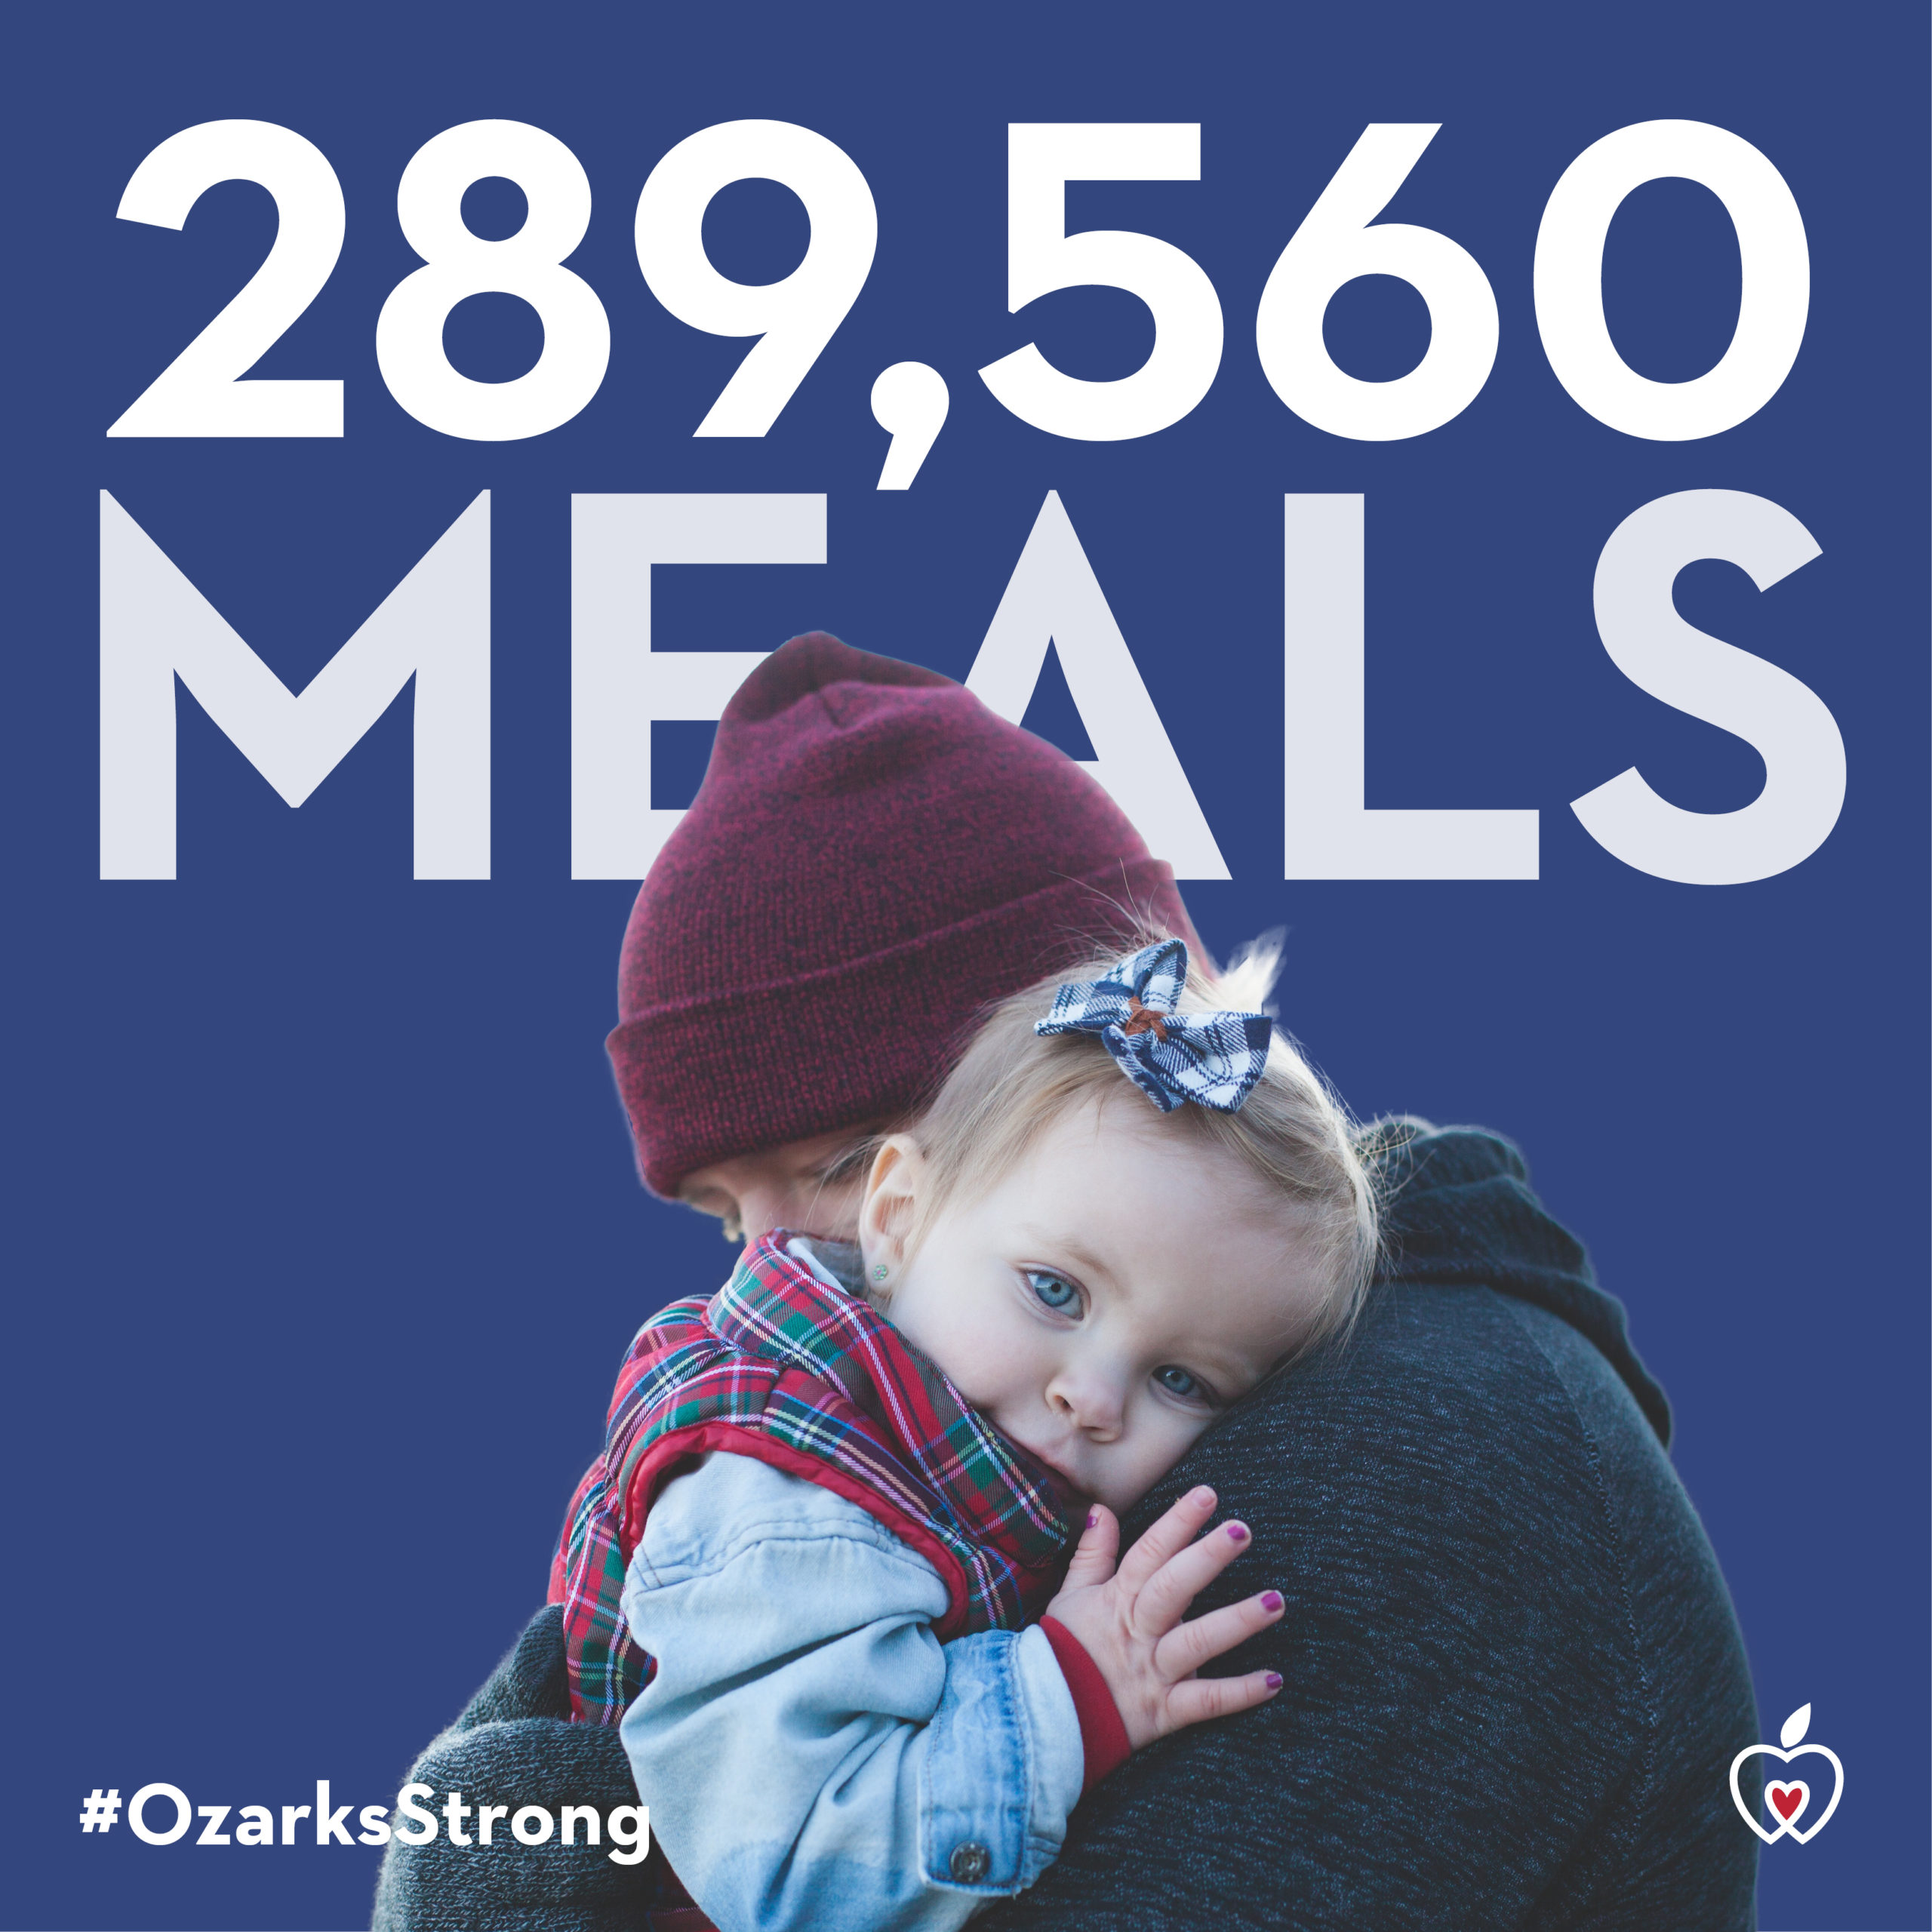 Giving Tuesday 2020 helps provide 100,000 meals